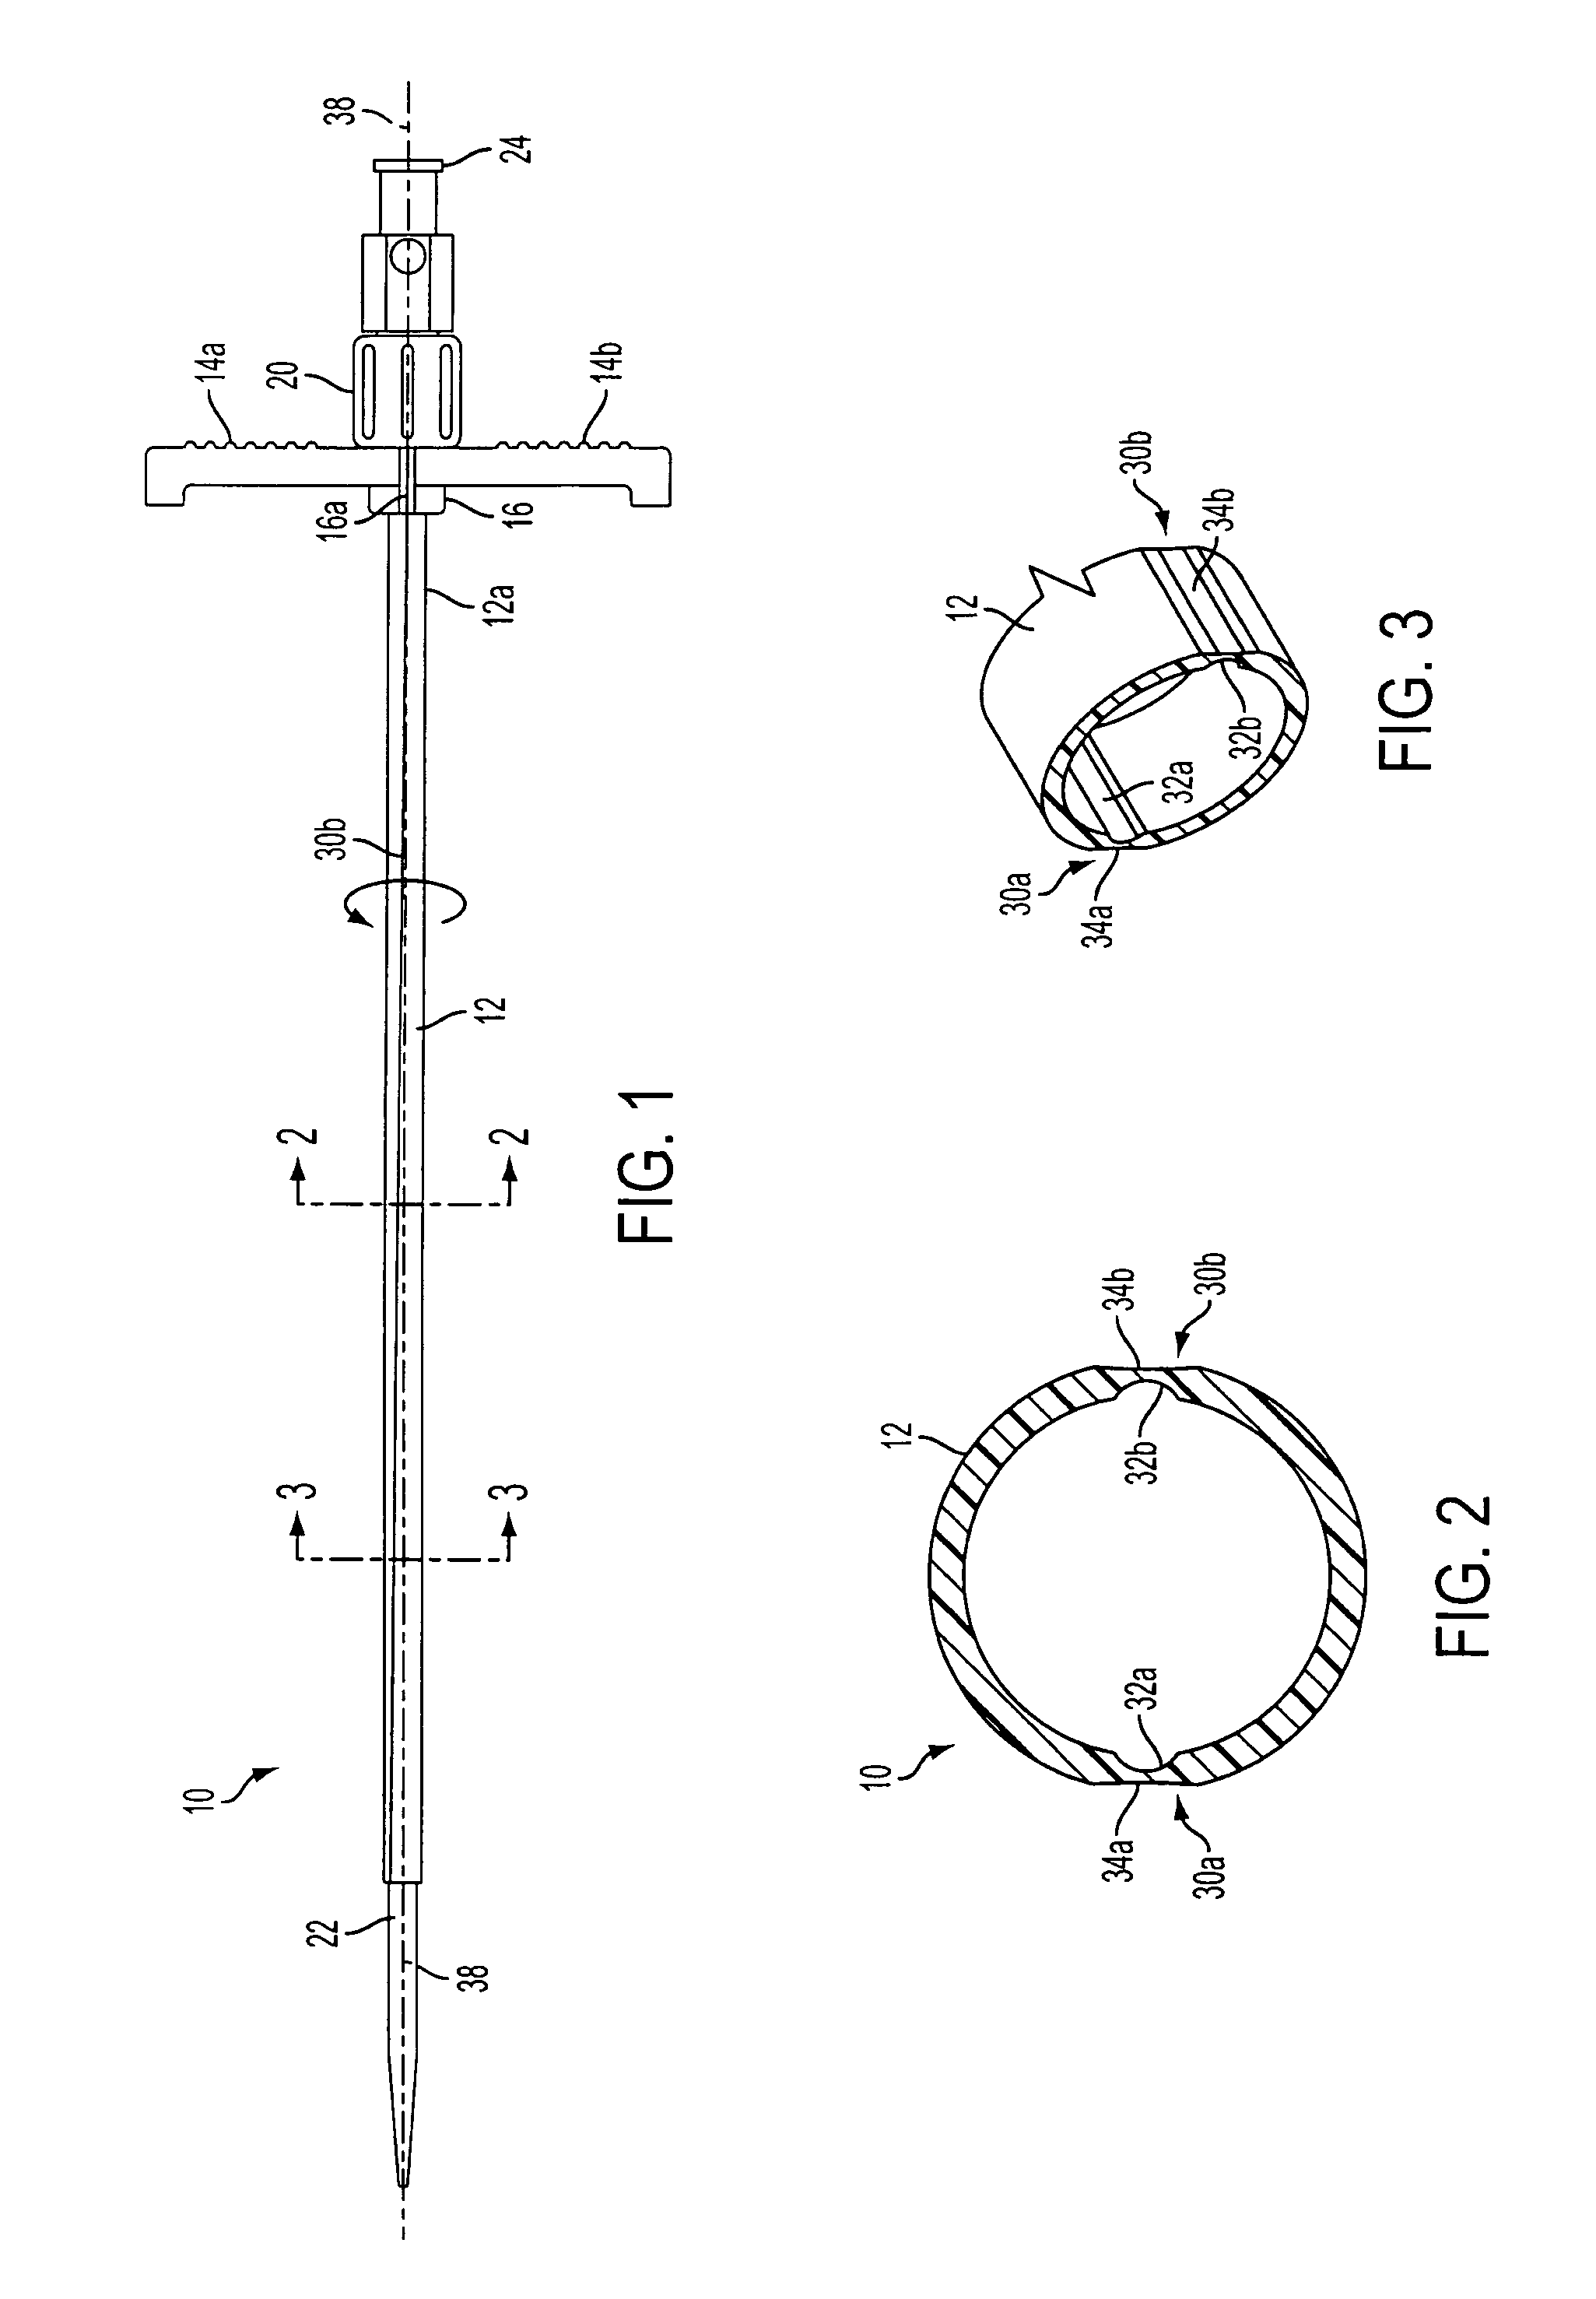 Peel-away introducer sheath having pitched peel lines and method of making same